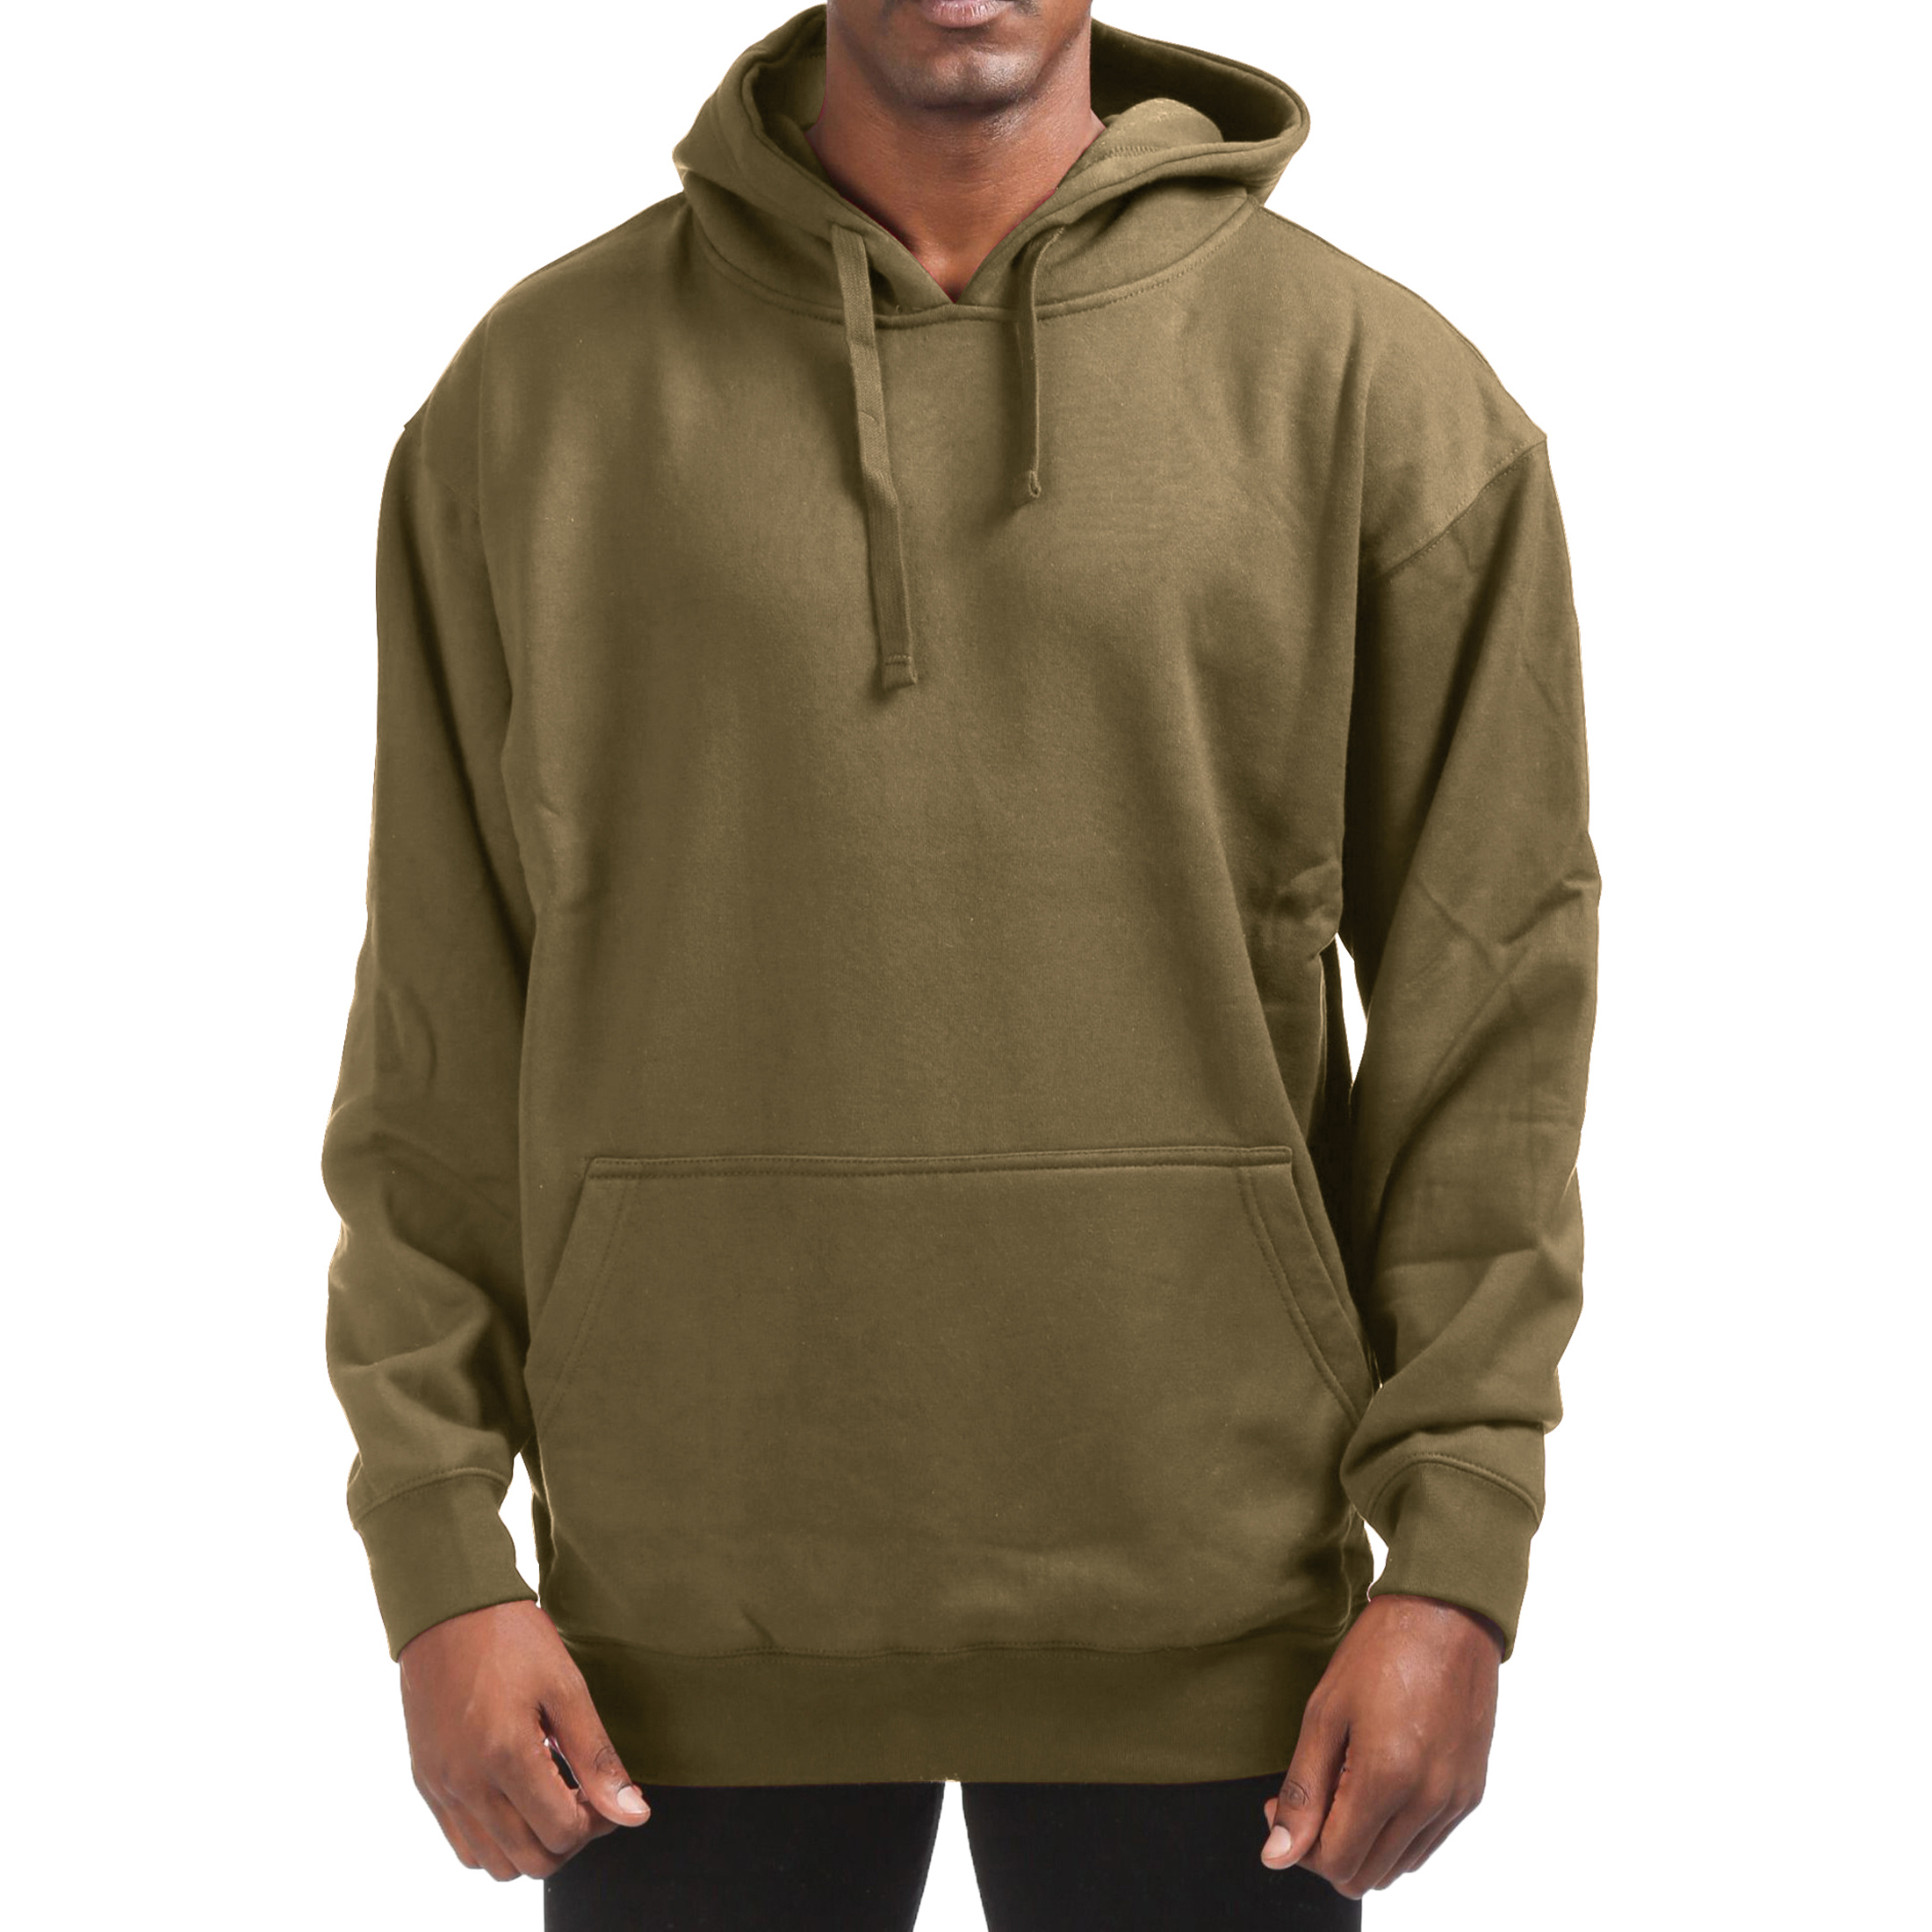 Men's Cotton-Blend Fleece Pullover Hoodie With Pocket (Big & Tall Sizes Available) - Olive, Large